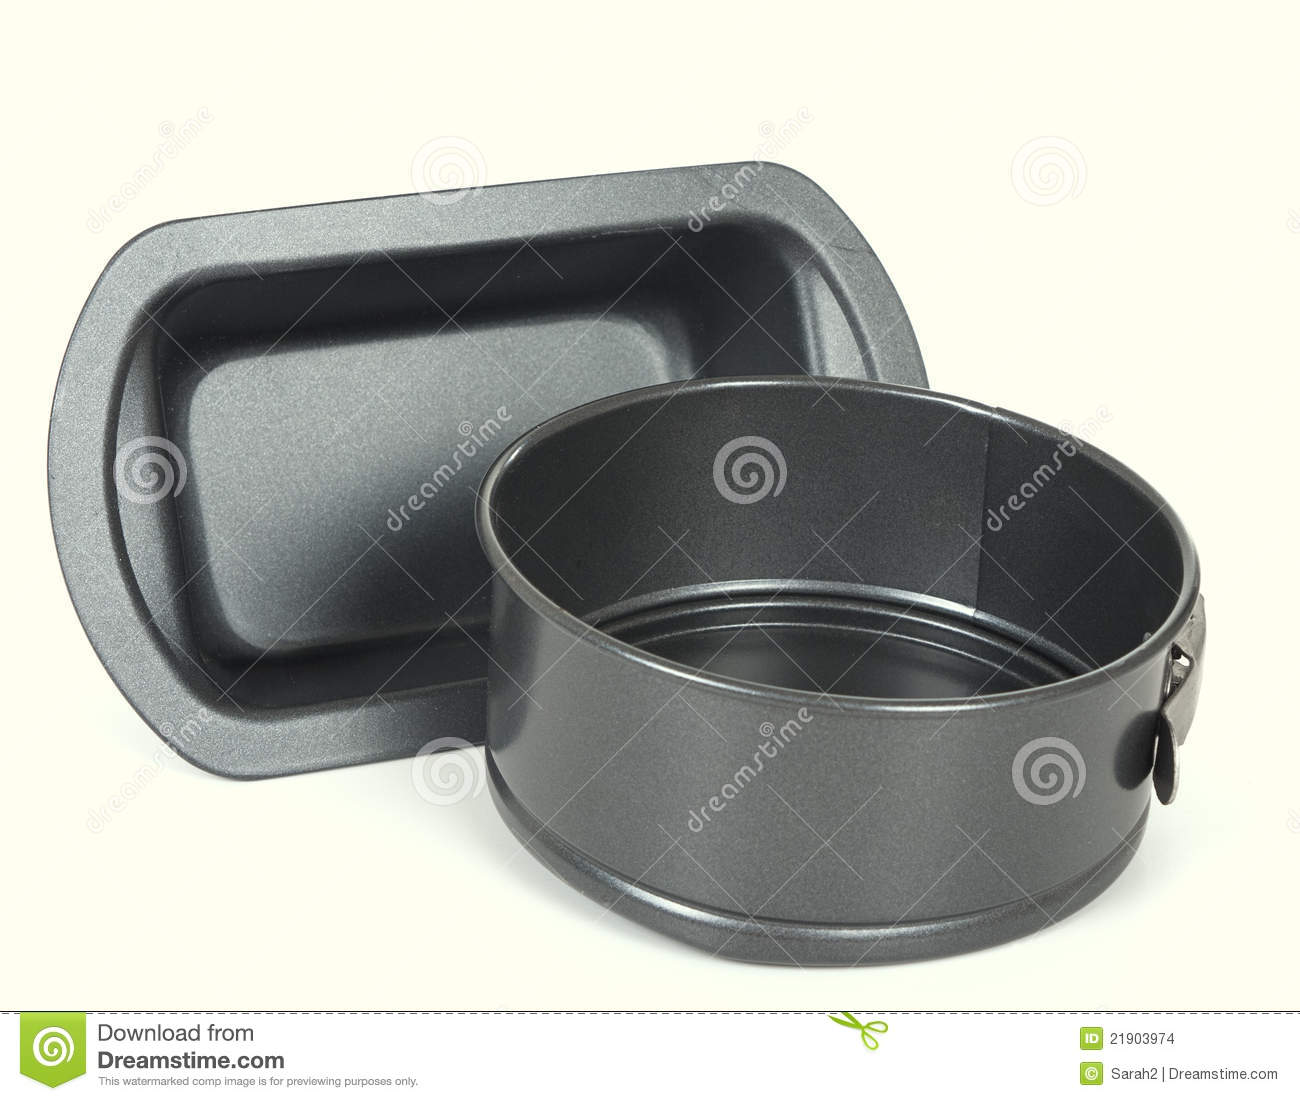 Home Baking Cake Tins Over White Stock Images   Image  21903974